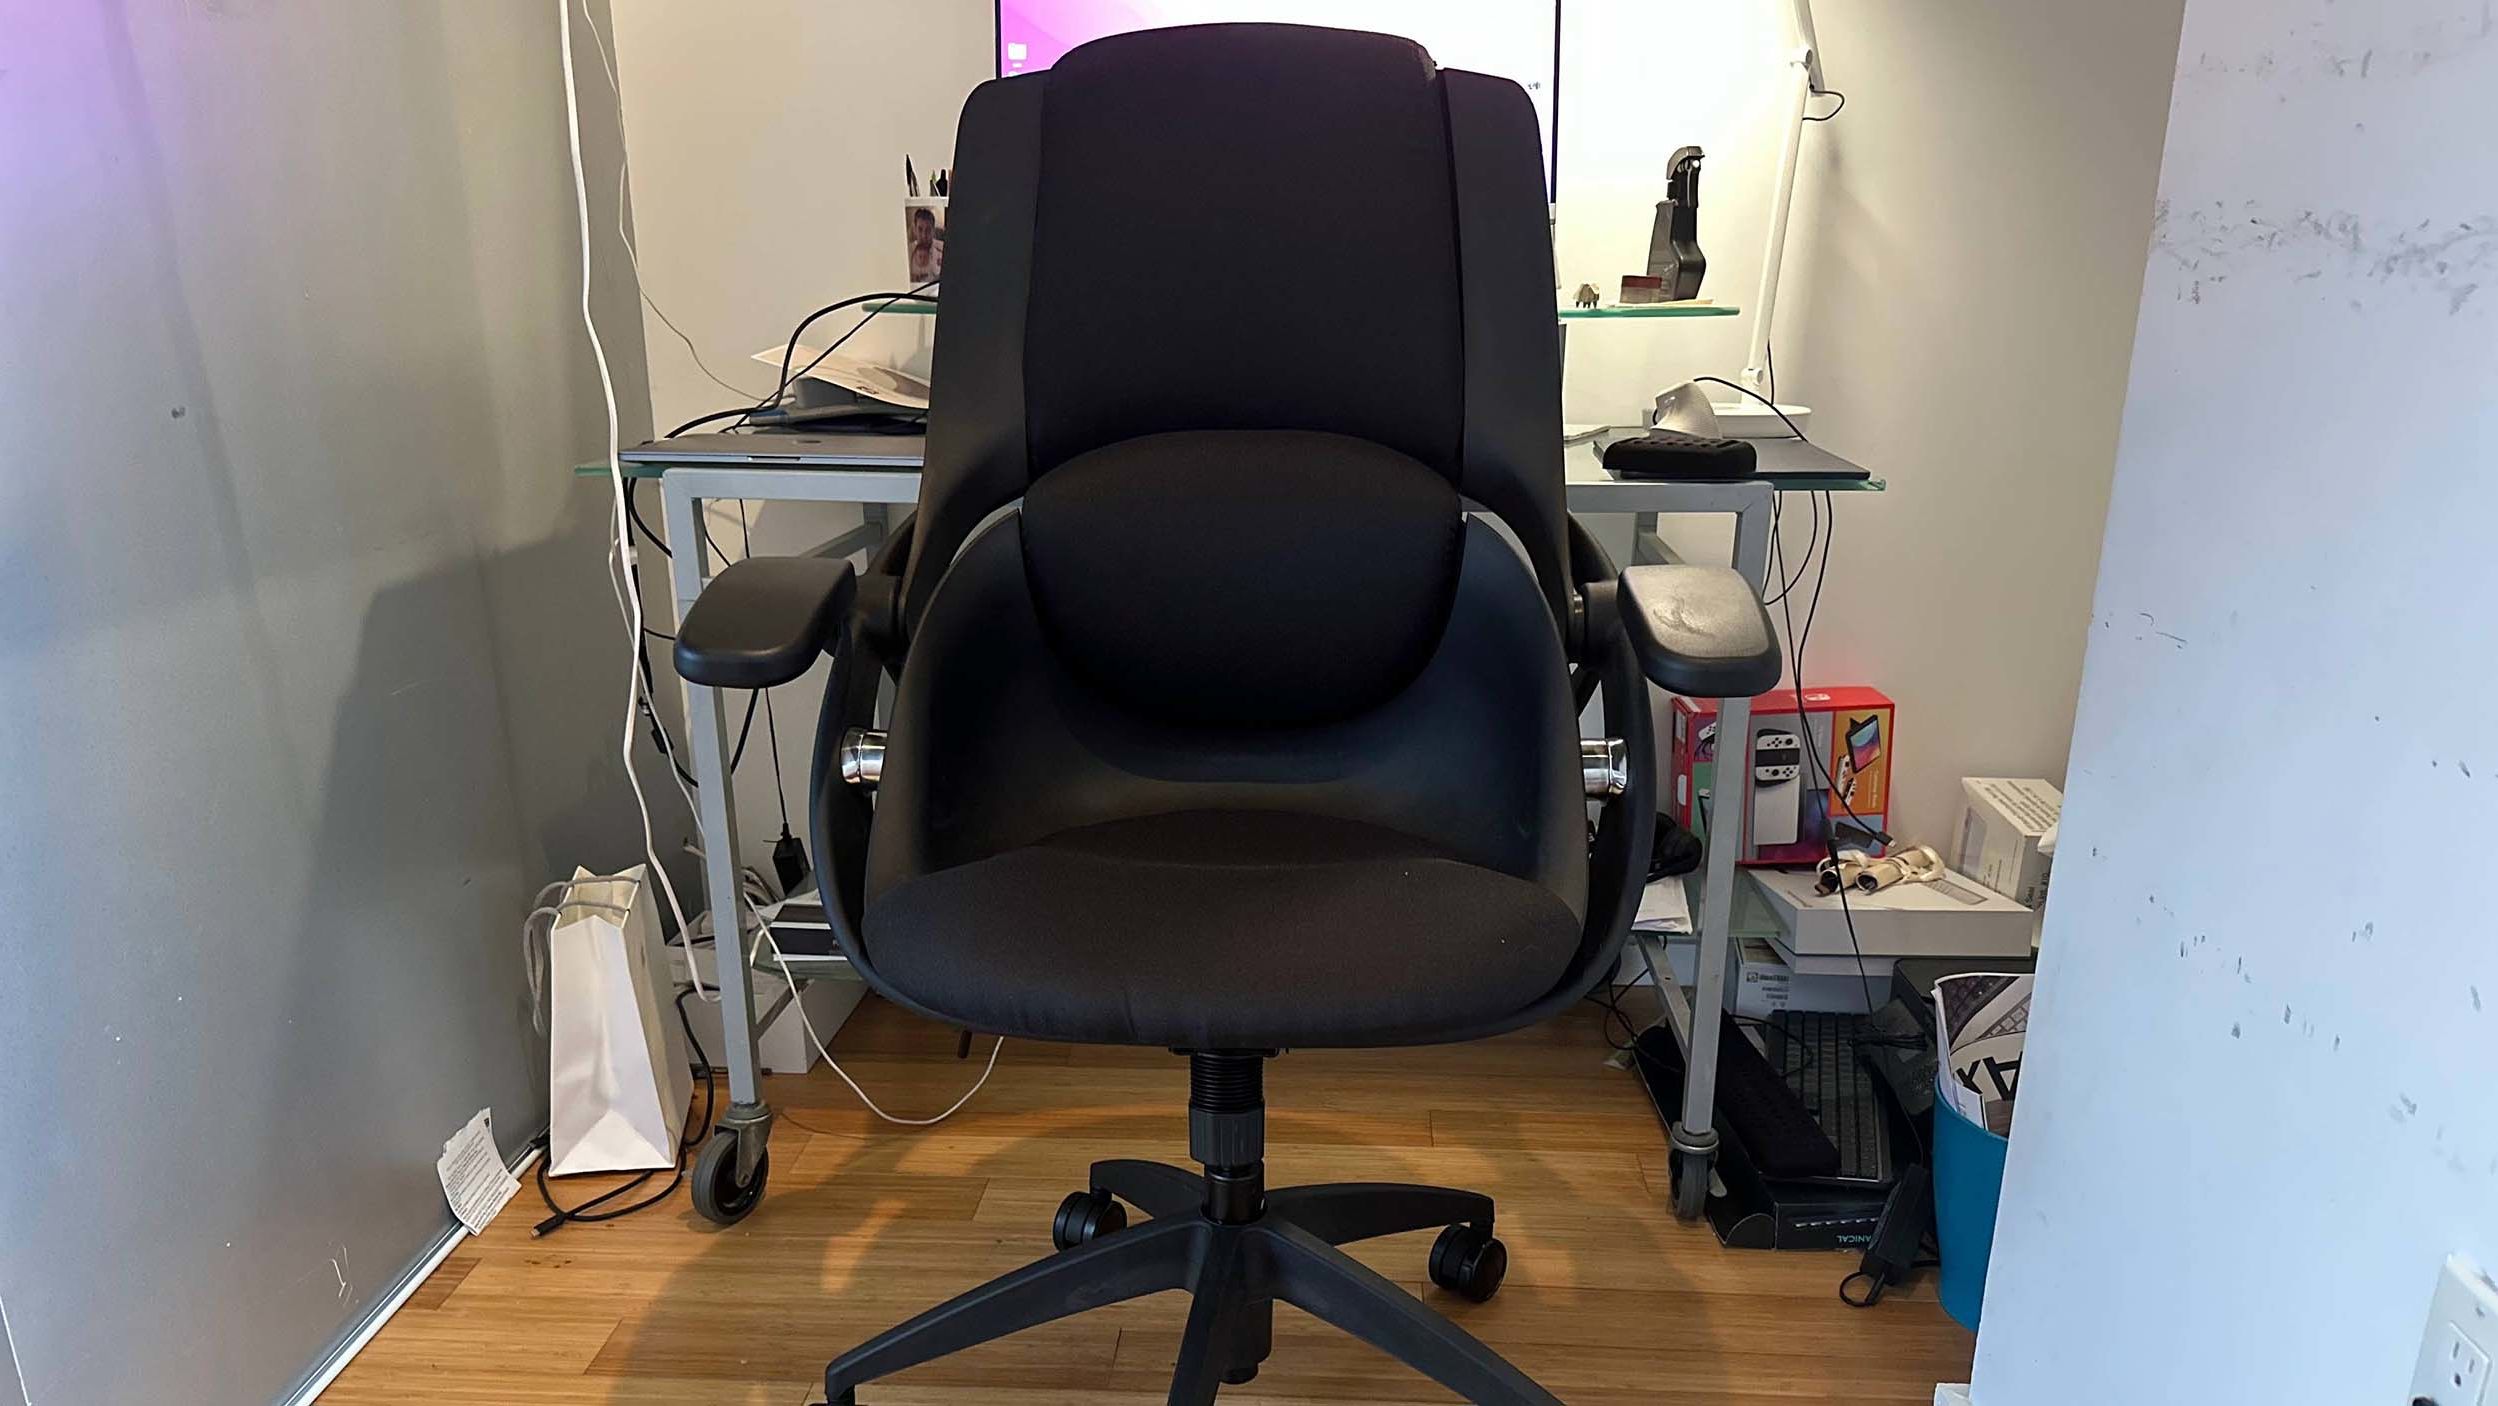 All33 Axion office chair review | CNN Underscored